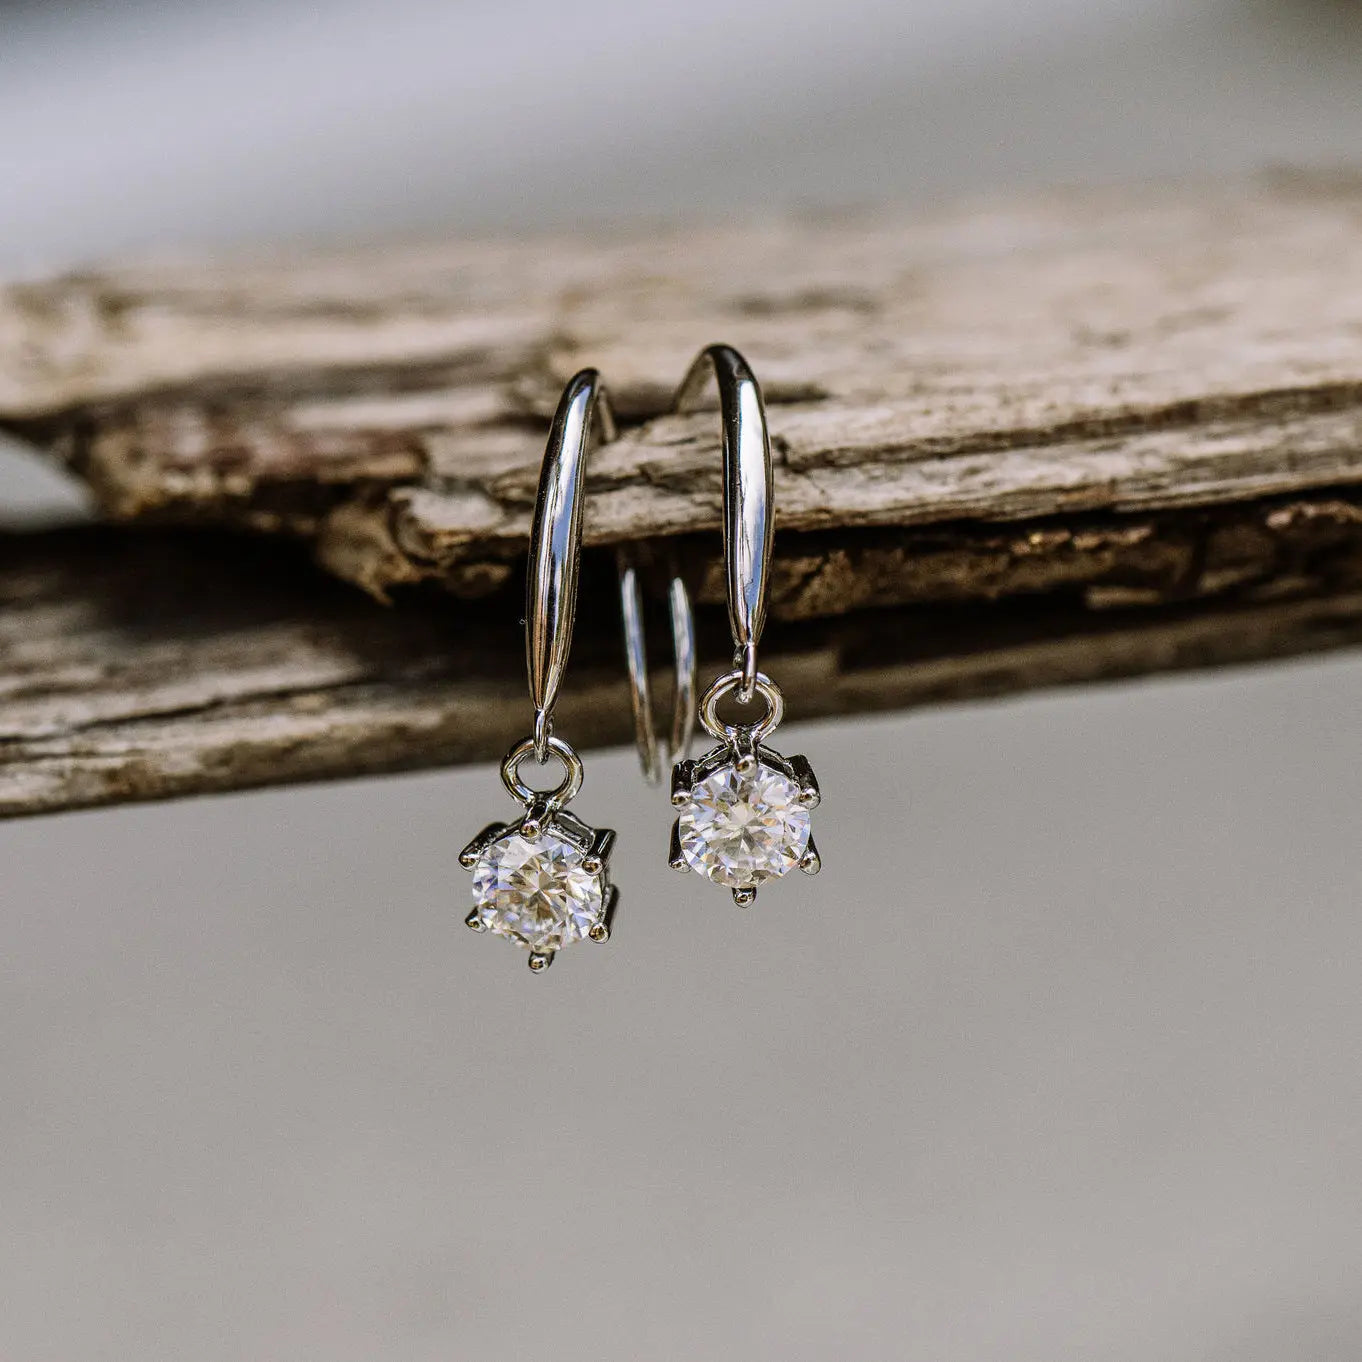 Moissanite Jewellery to Add to Your Collection